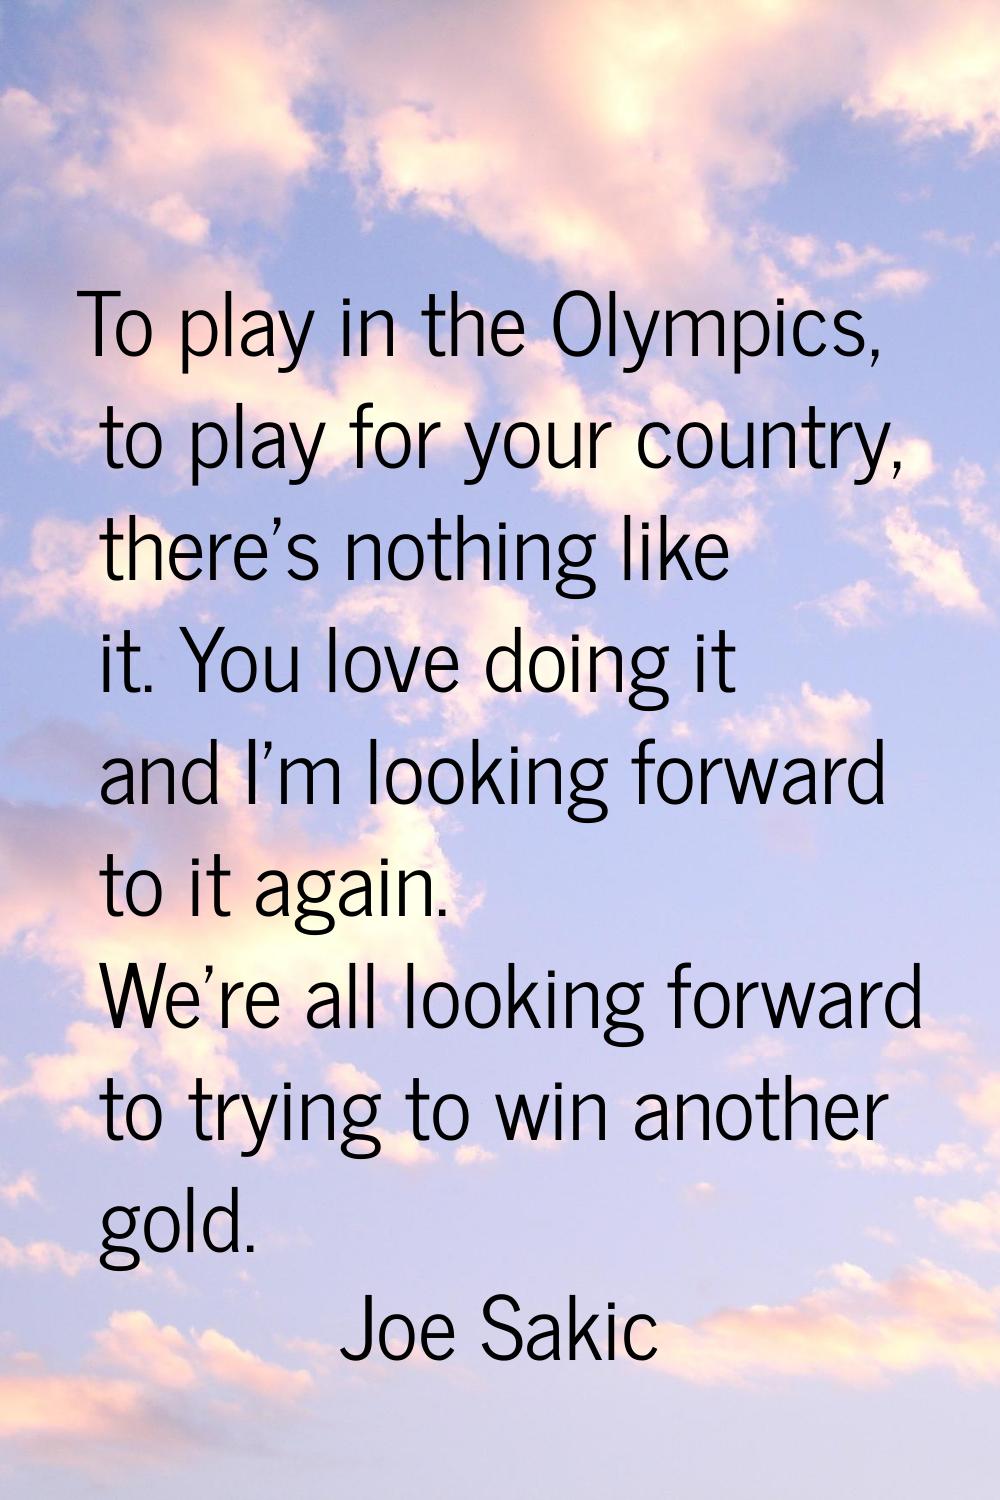 To play in the Olympics, to play for your country, there's nothing like it. You love doing it and I